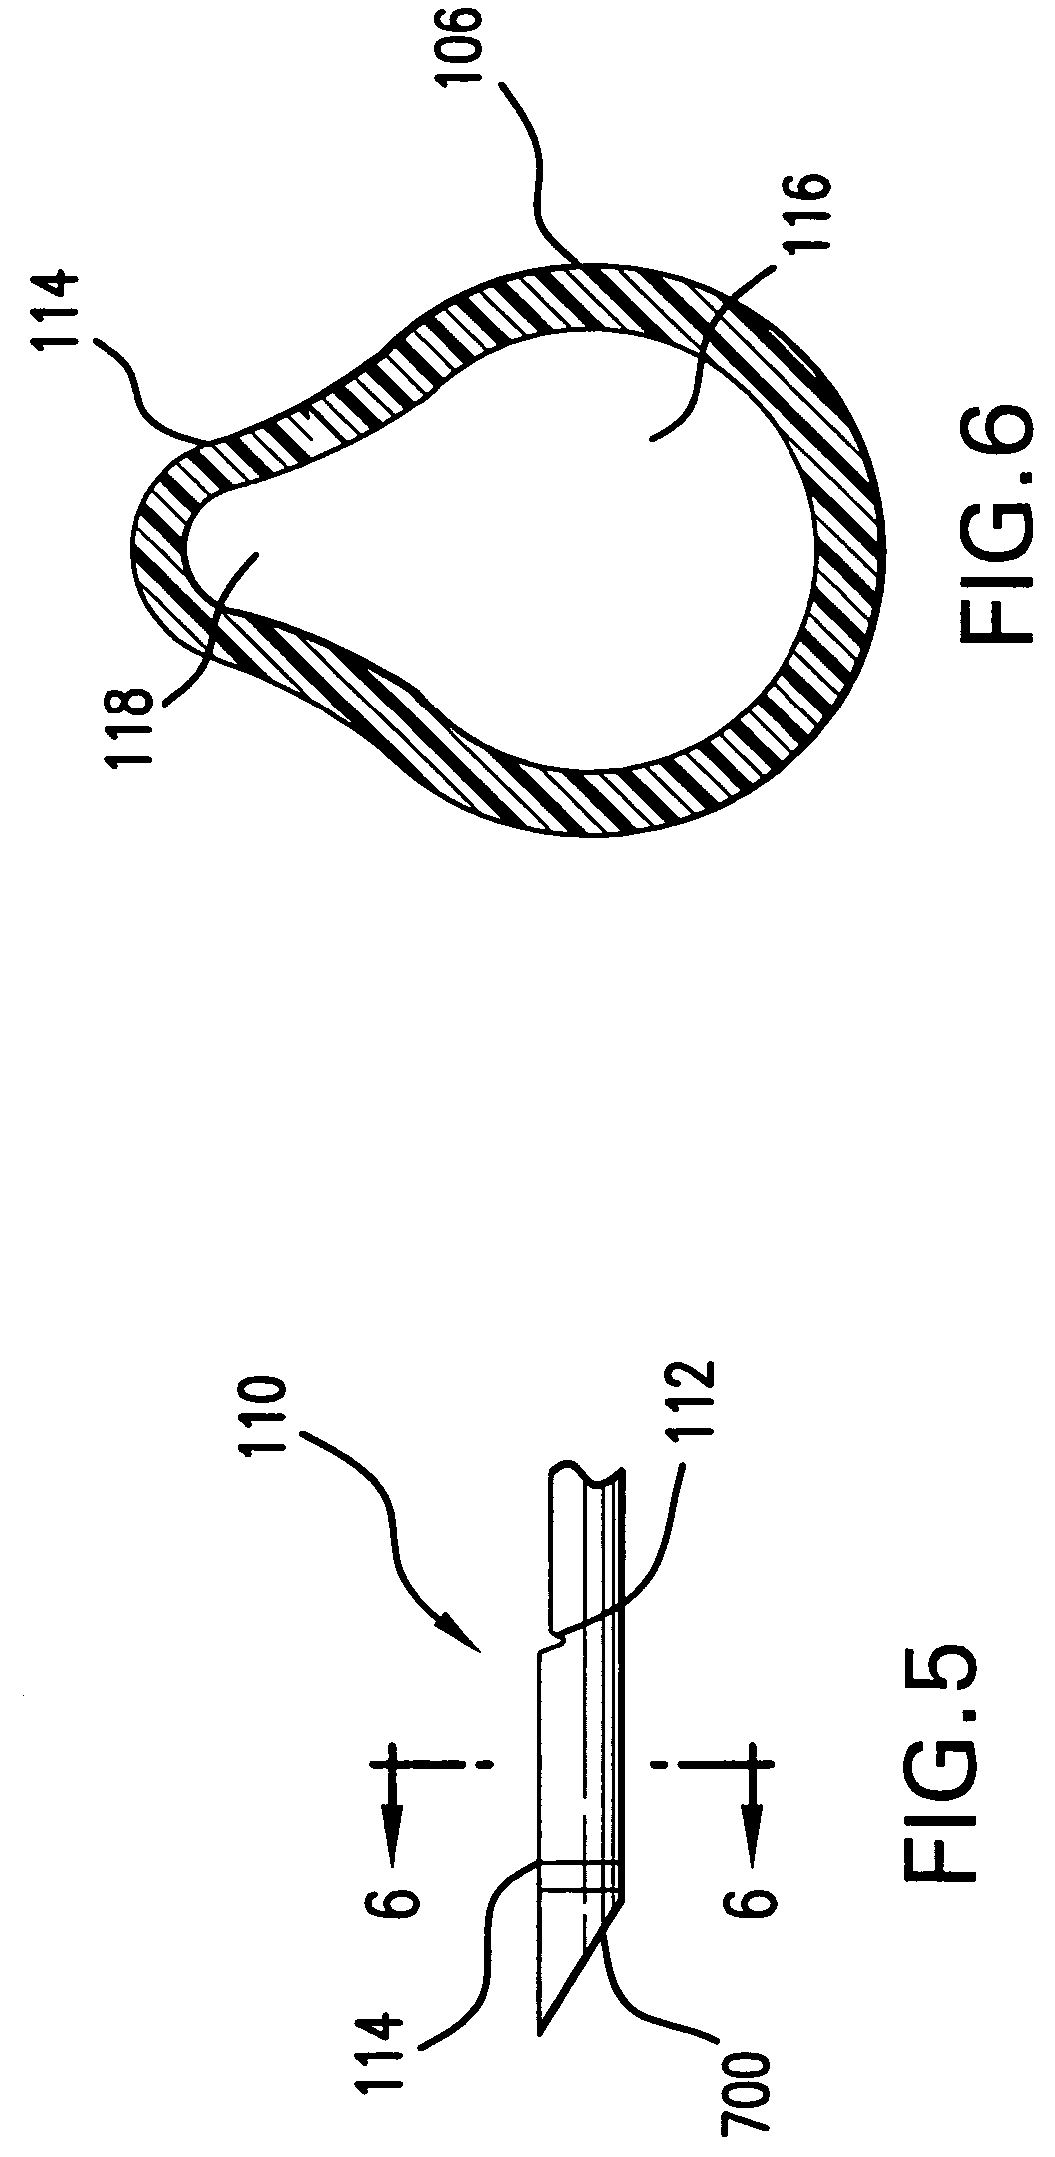 Aspiration catheter with tracking portion